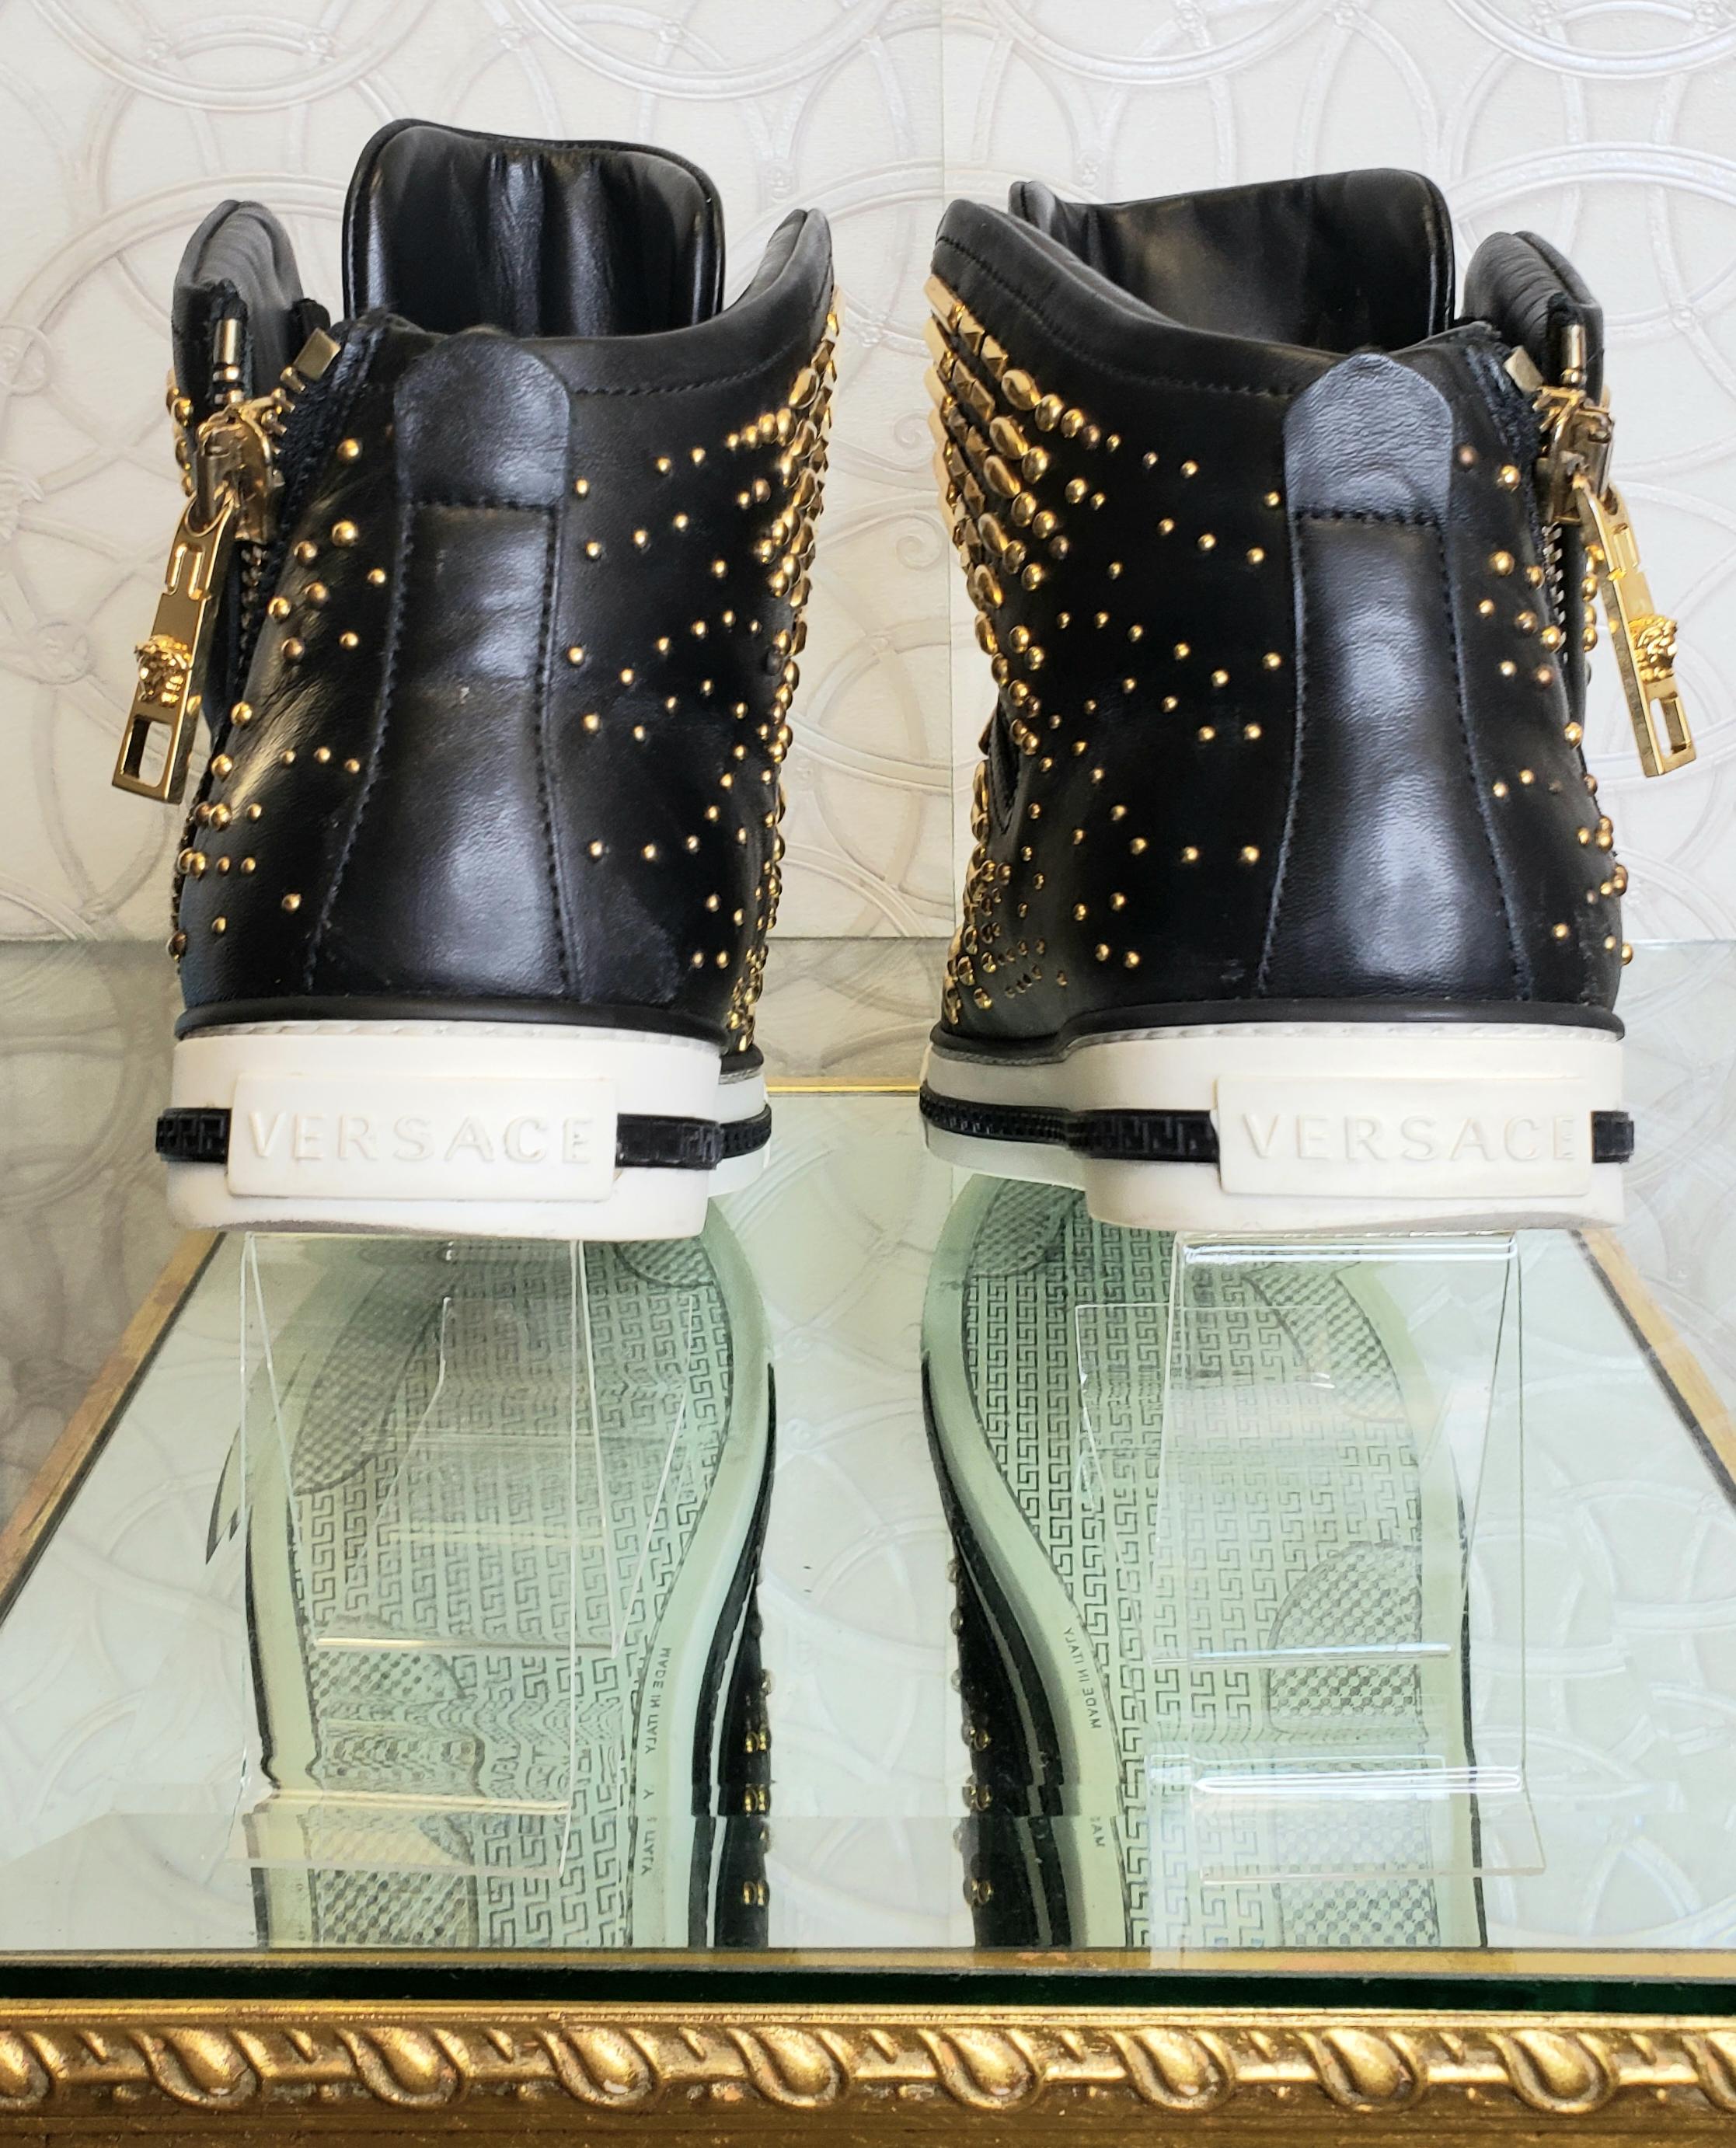 Black VERSACE STUDDED HIGH-TOP SNEAKERS with GOLD MEDUSA side ZIPPER